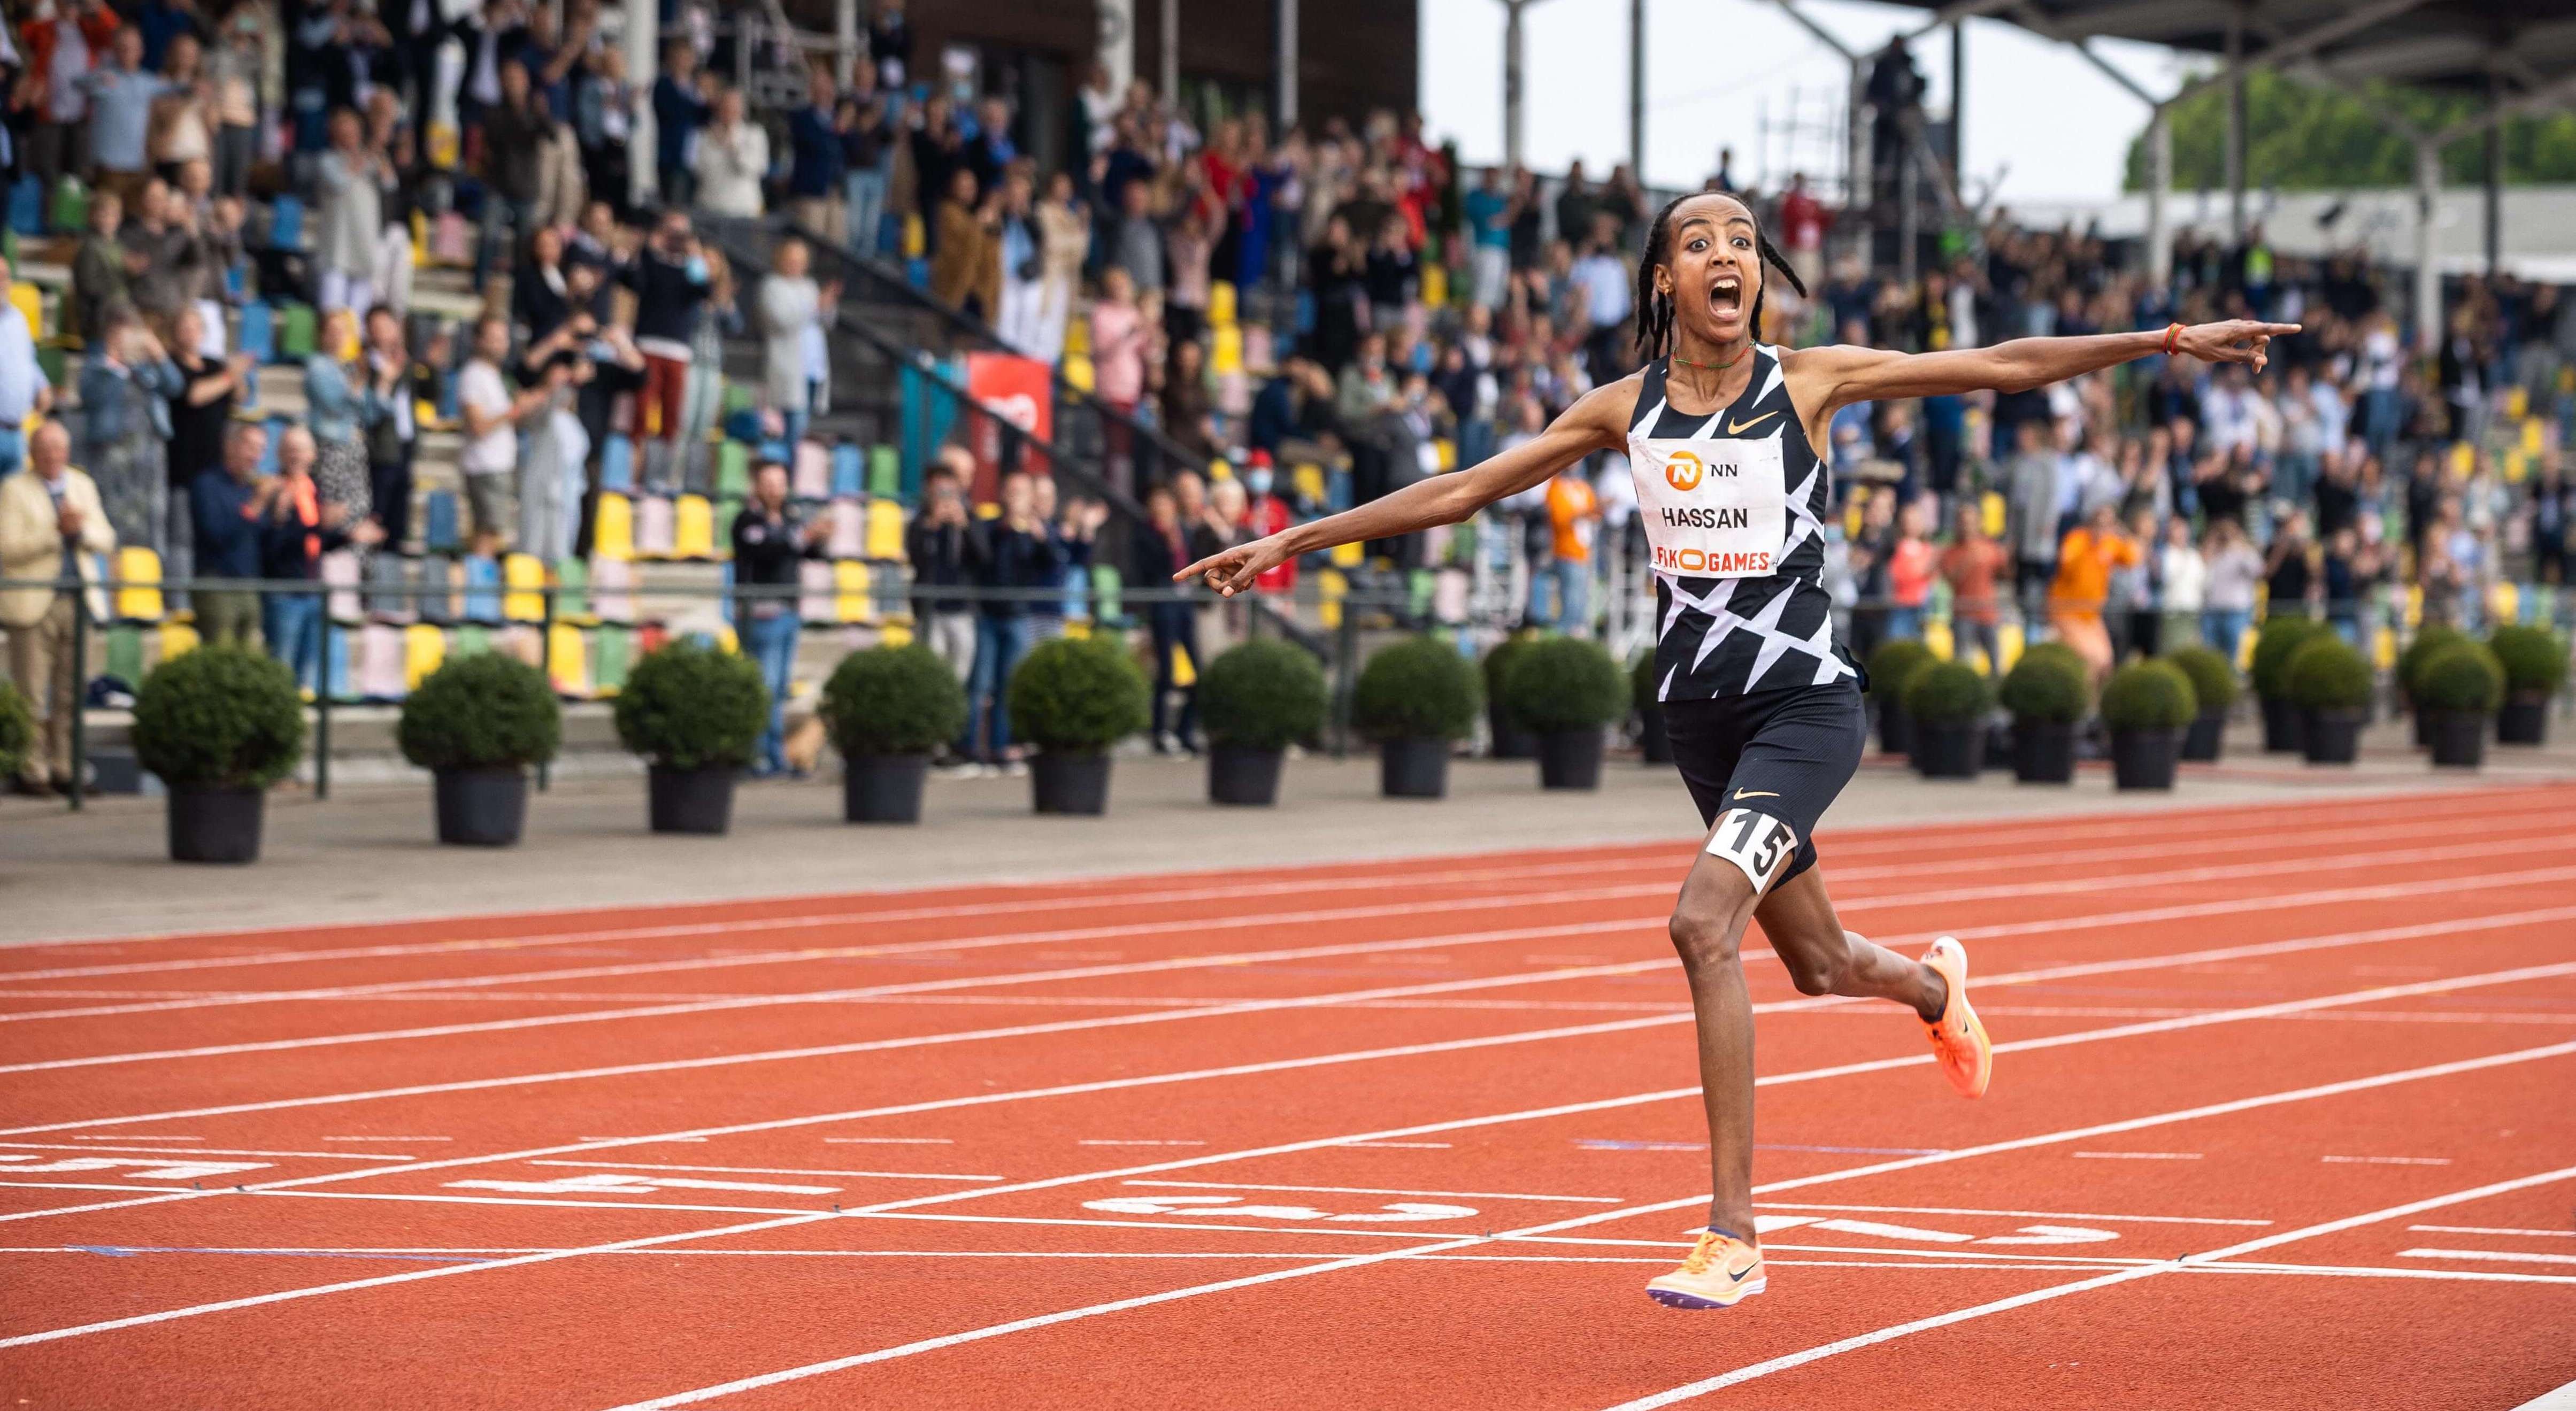 Sifan Hassan celebrating on the track